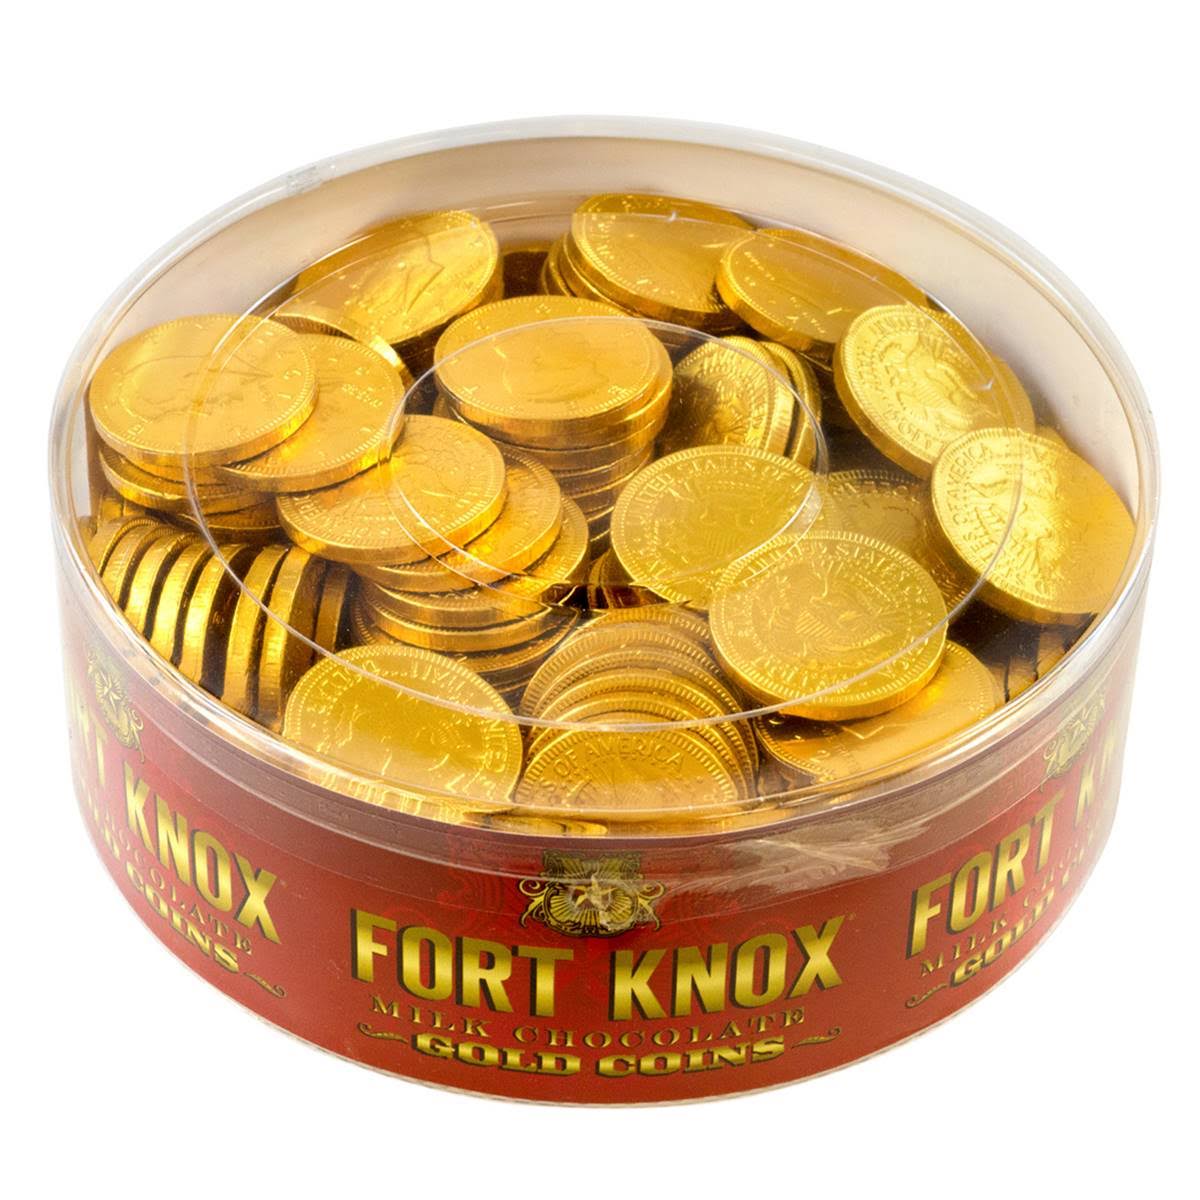 Fort Knox Chocolate Gold Coins - Milk Chocolate, 1.61lbs, 144 Pieces